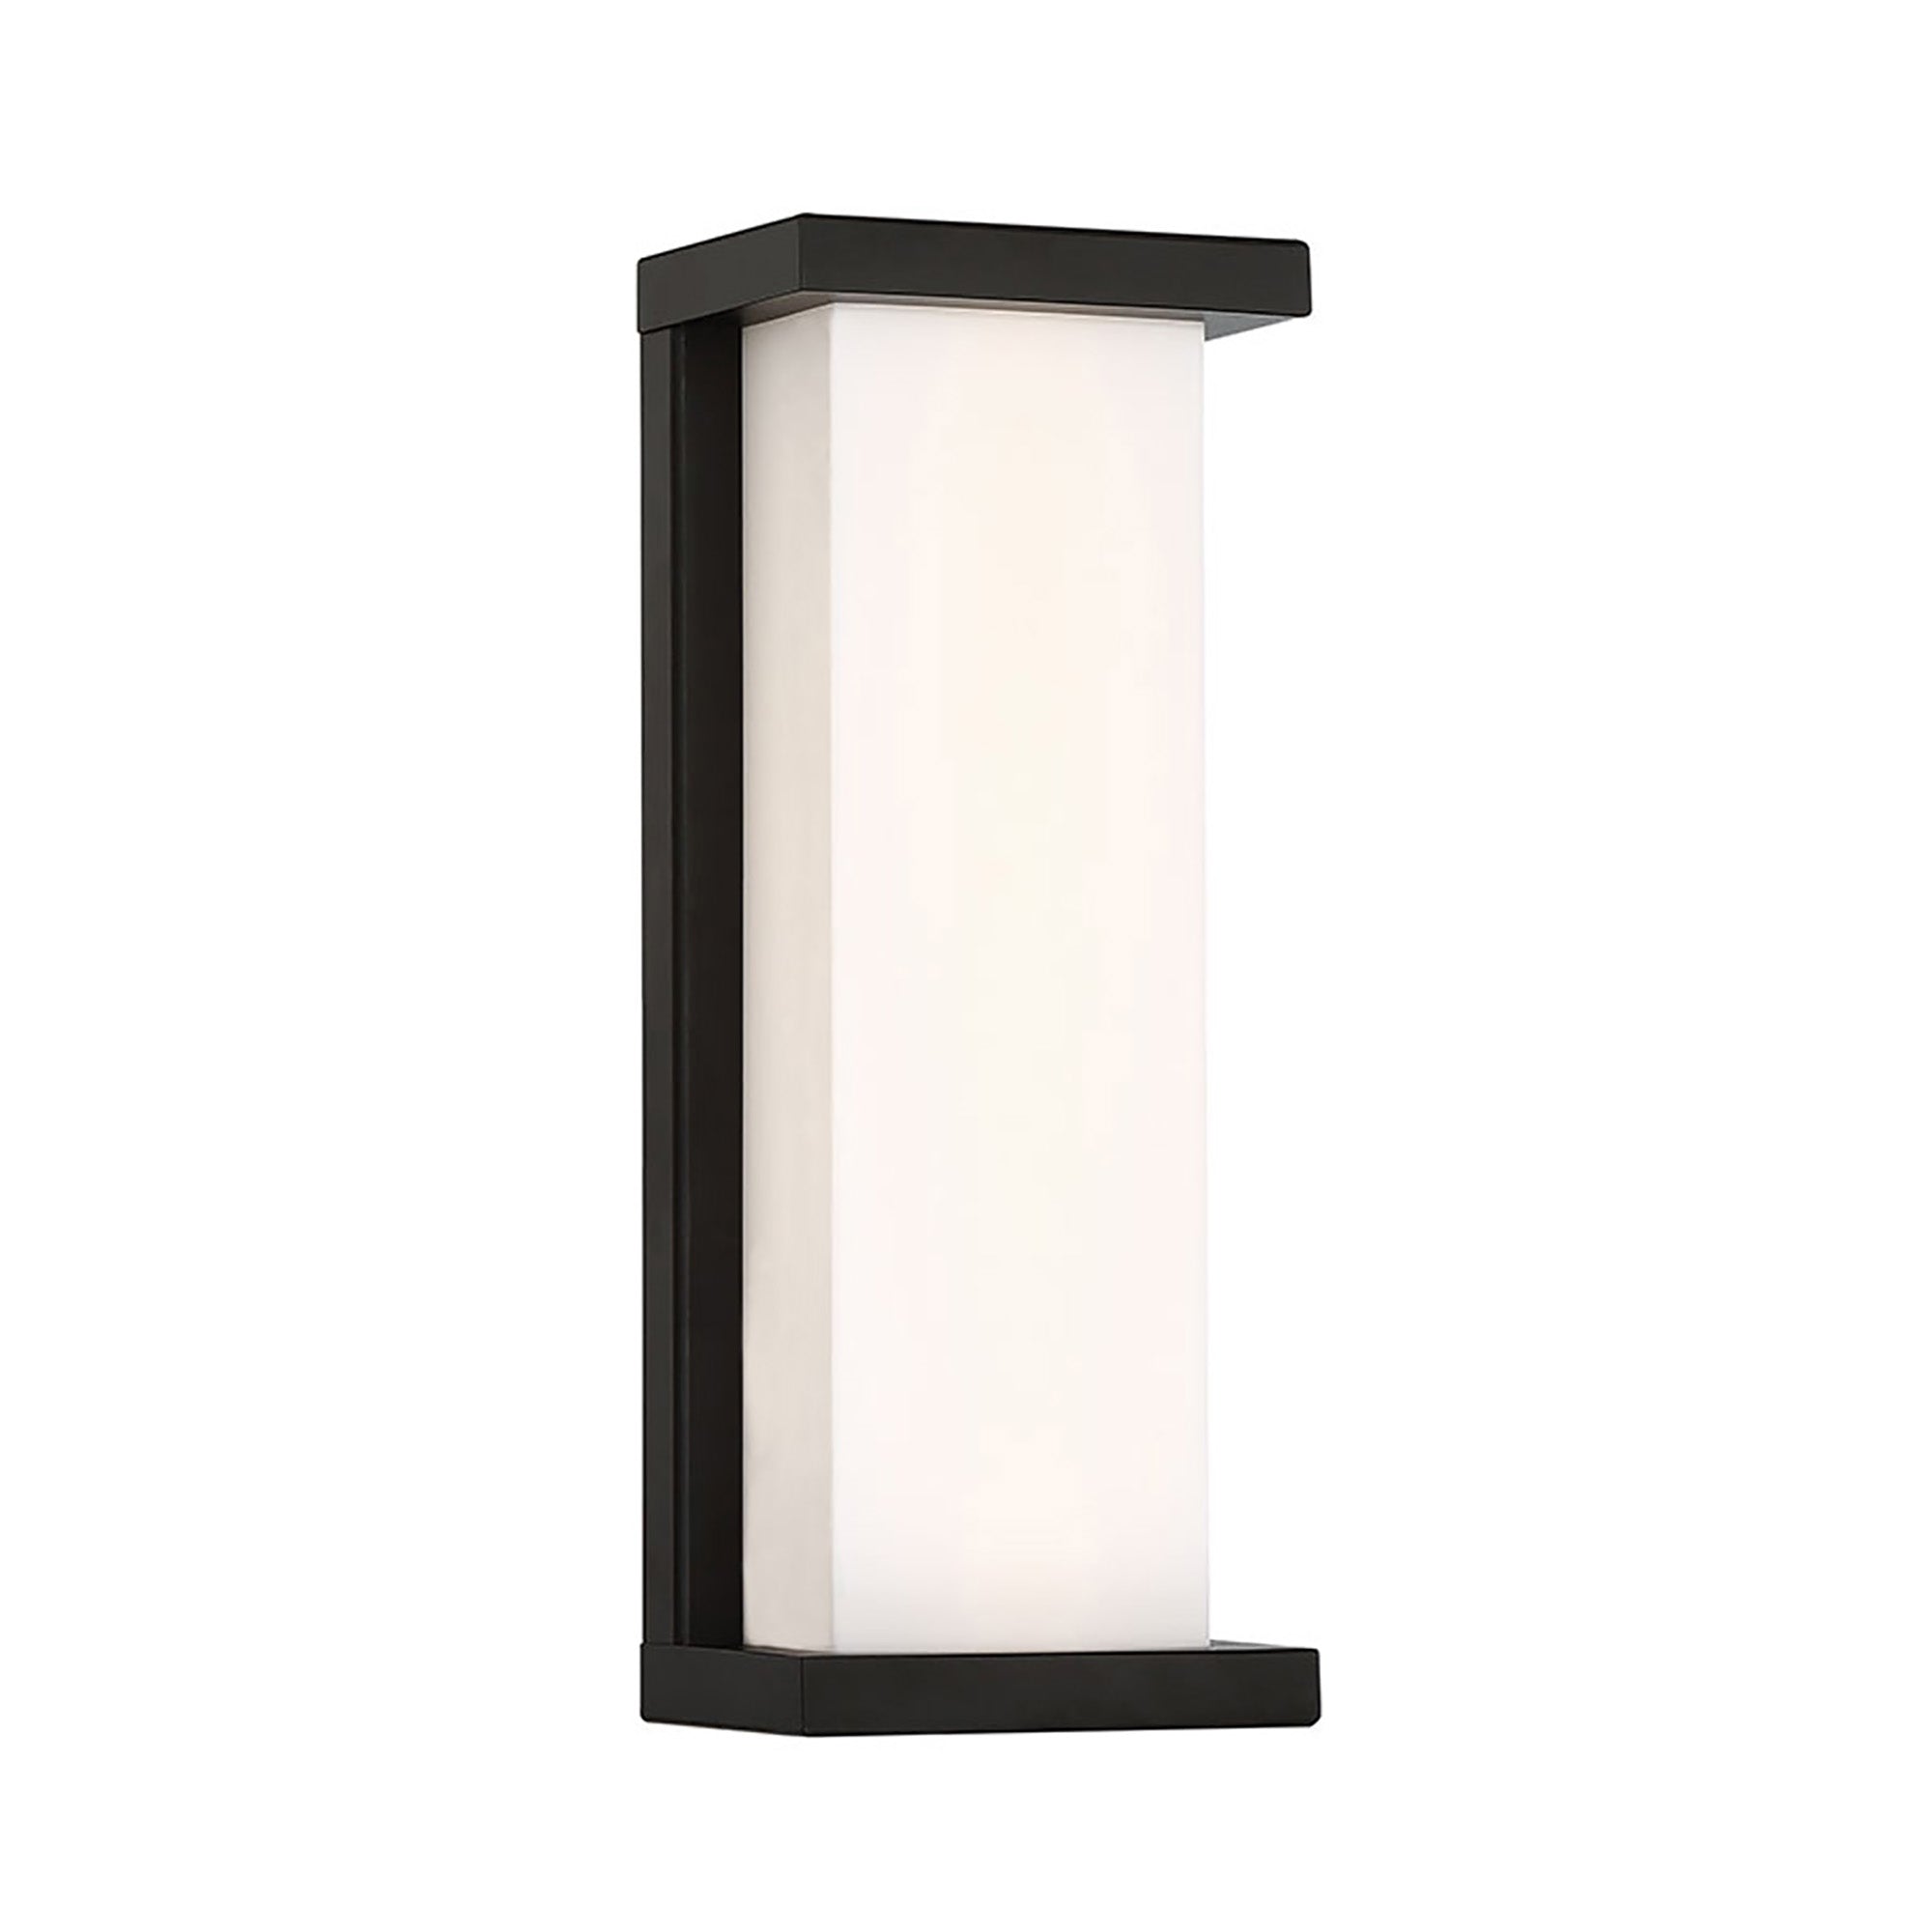 Case 14" LED Indoor/Outdoor Wall Light